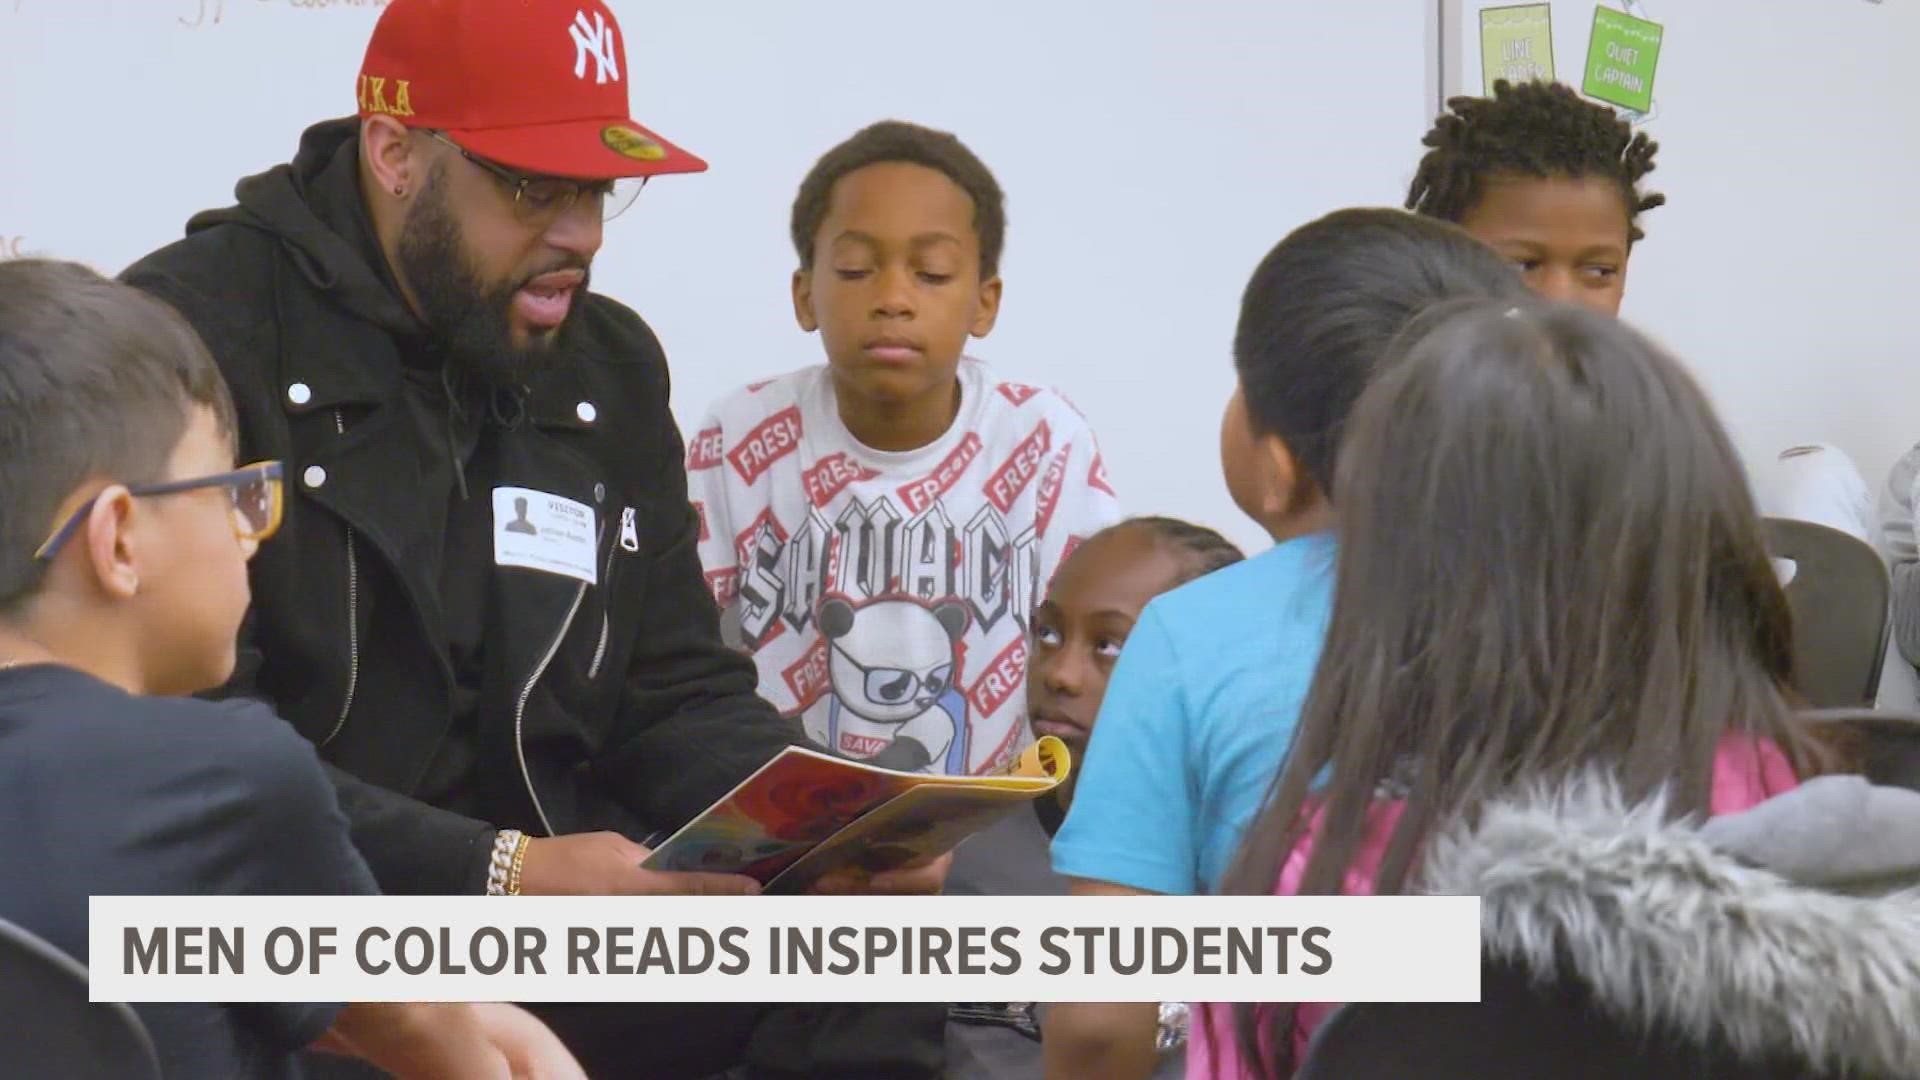 The Men of Color reads literacy campaign continues to inspire students as they visit multiple schools in the Kent County and Muskegon area.